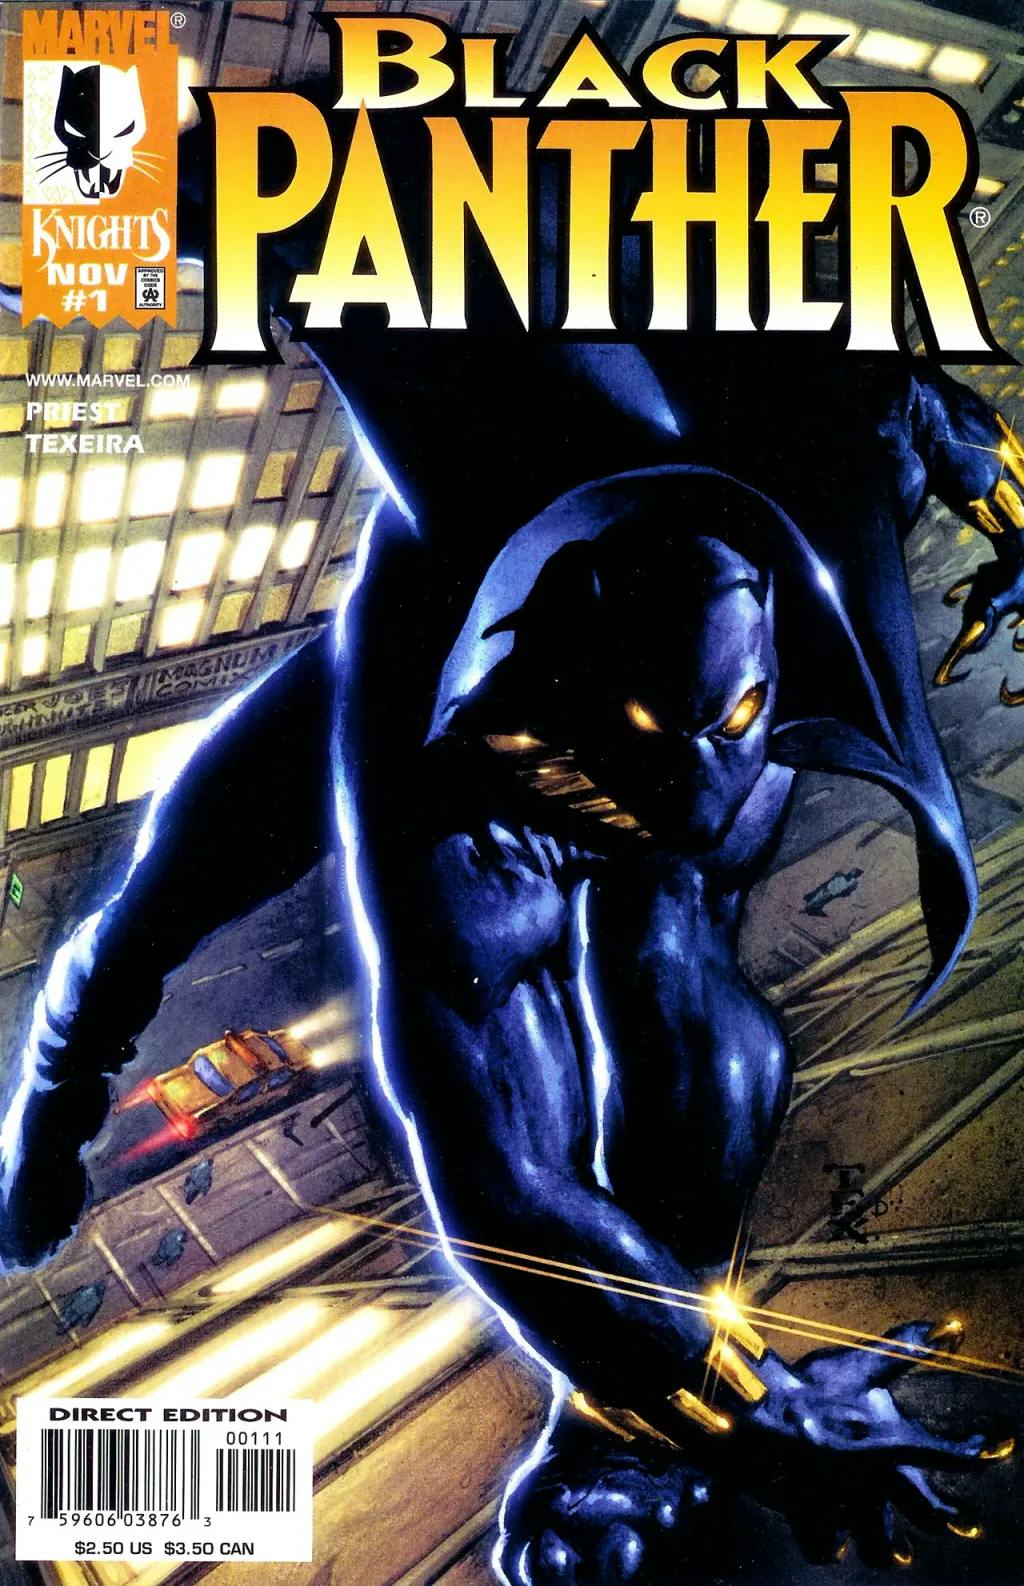 Black Panther #1 by Christopher Priest and Mark Texeira